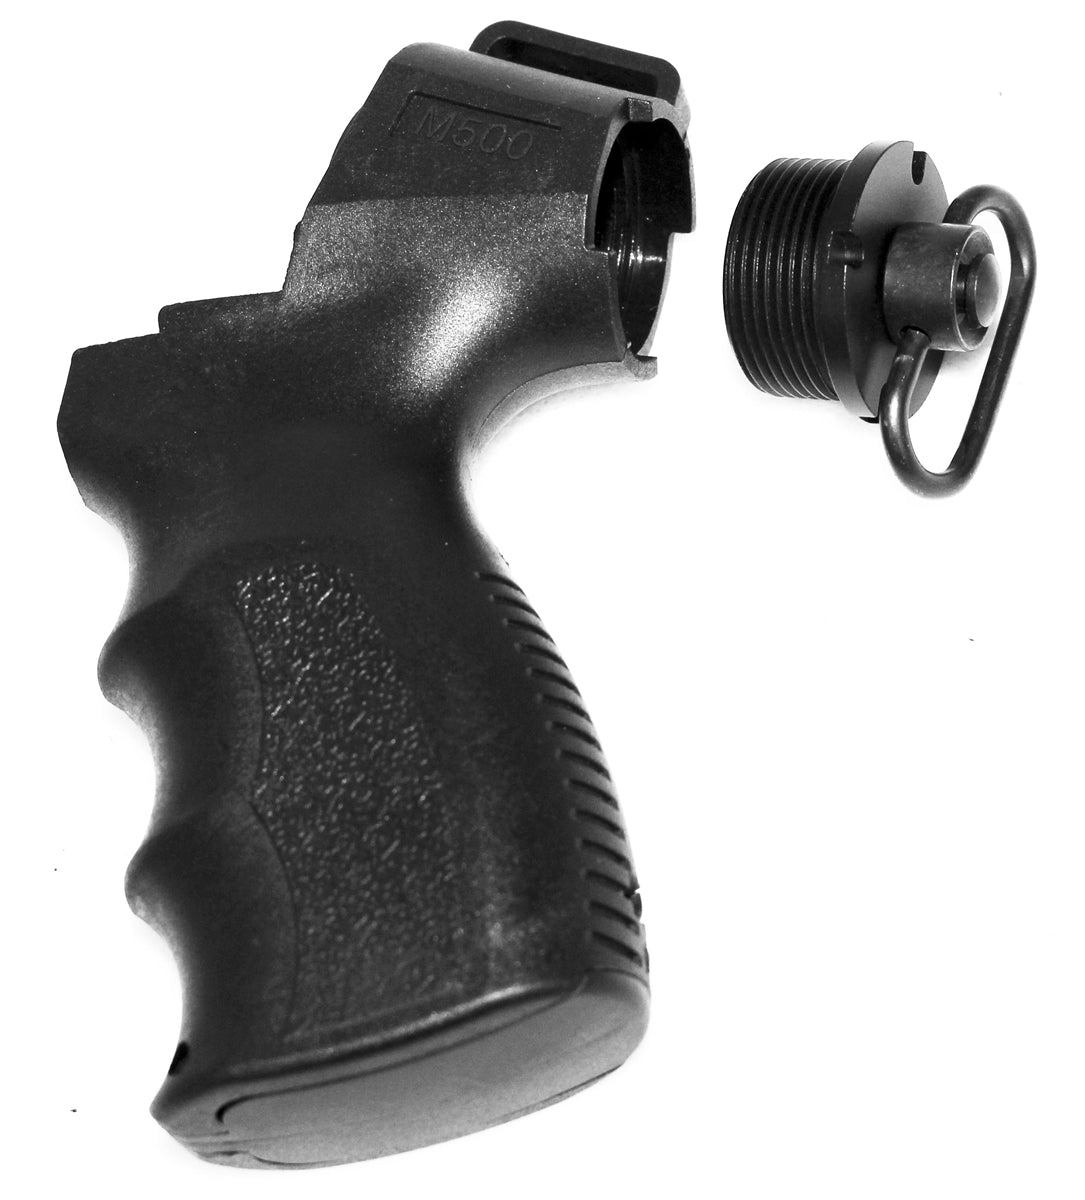 Mossberg 535 12 Gauge Rear Grip With Sling Adapter Home Defense Tactical Hunting Accessory. - TRINITY SUPPLY INC